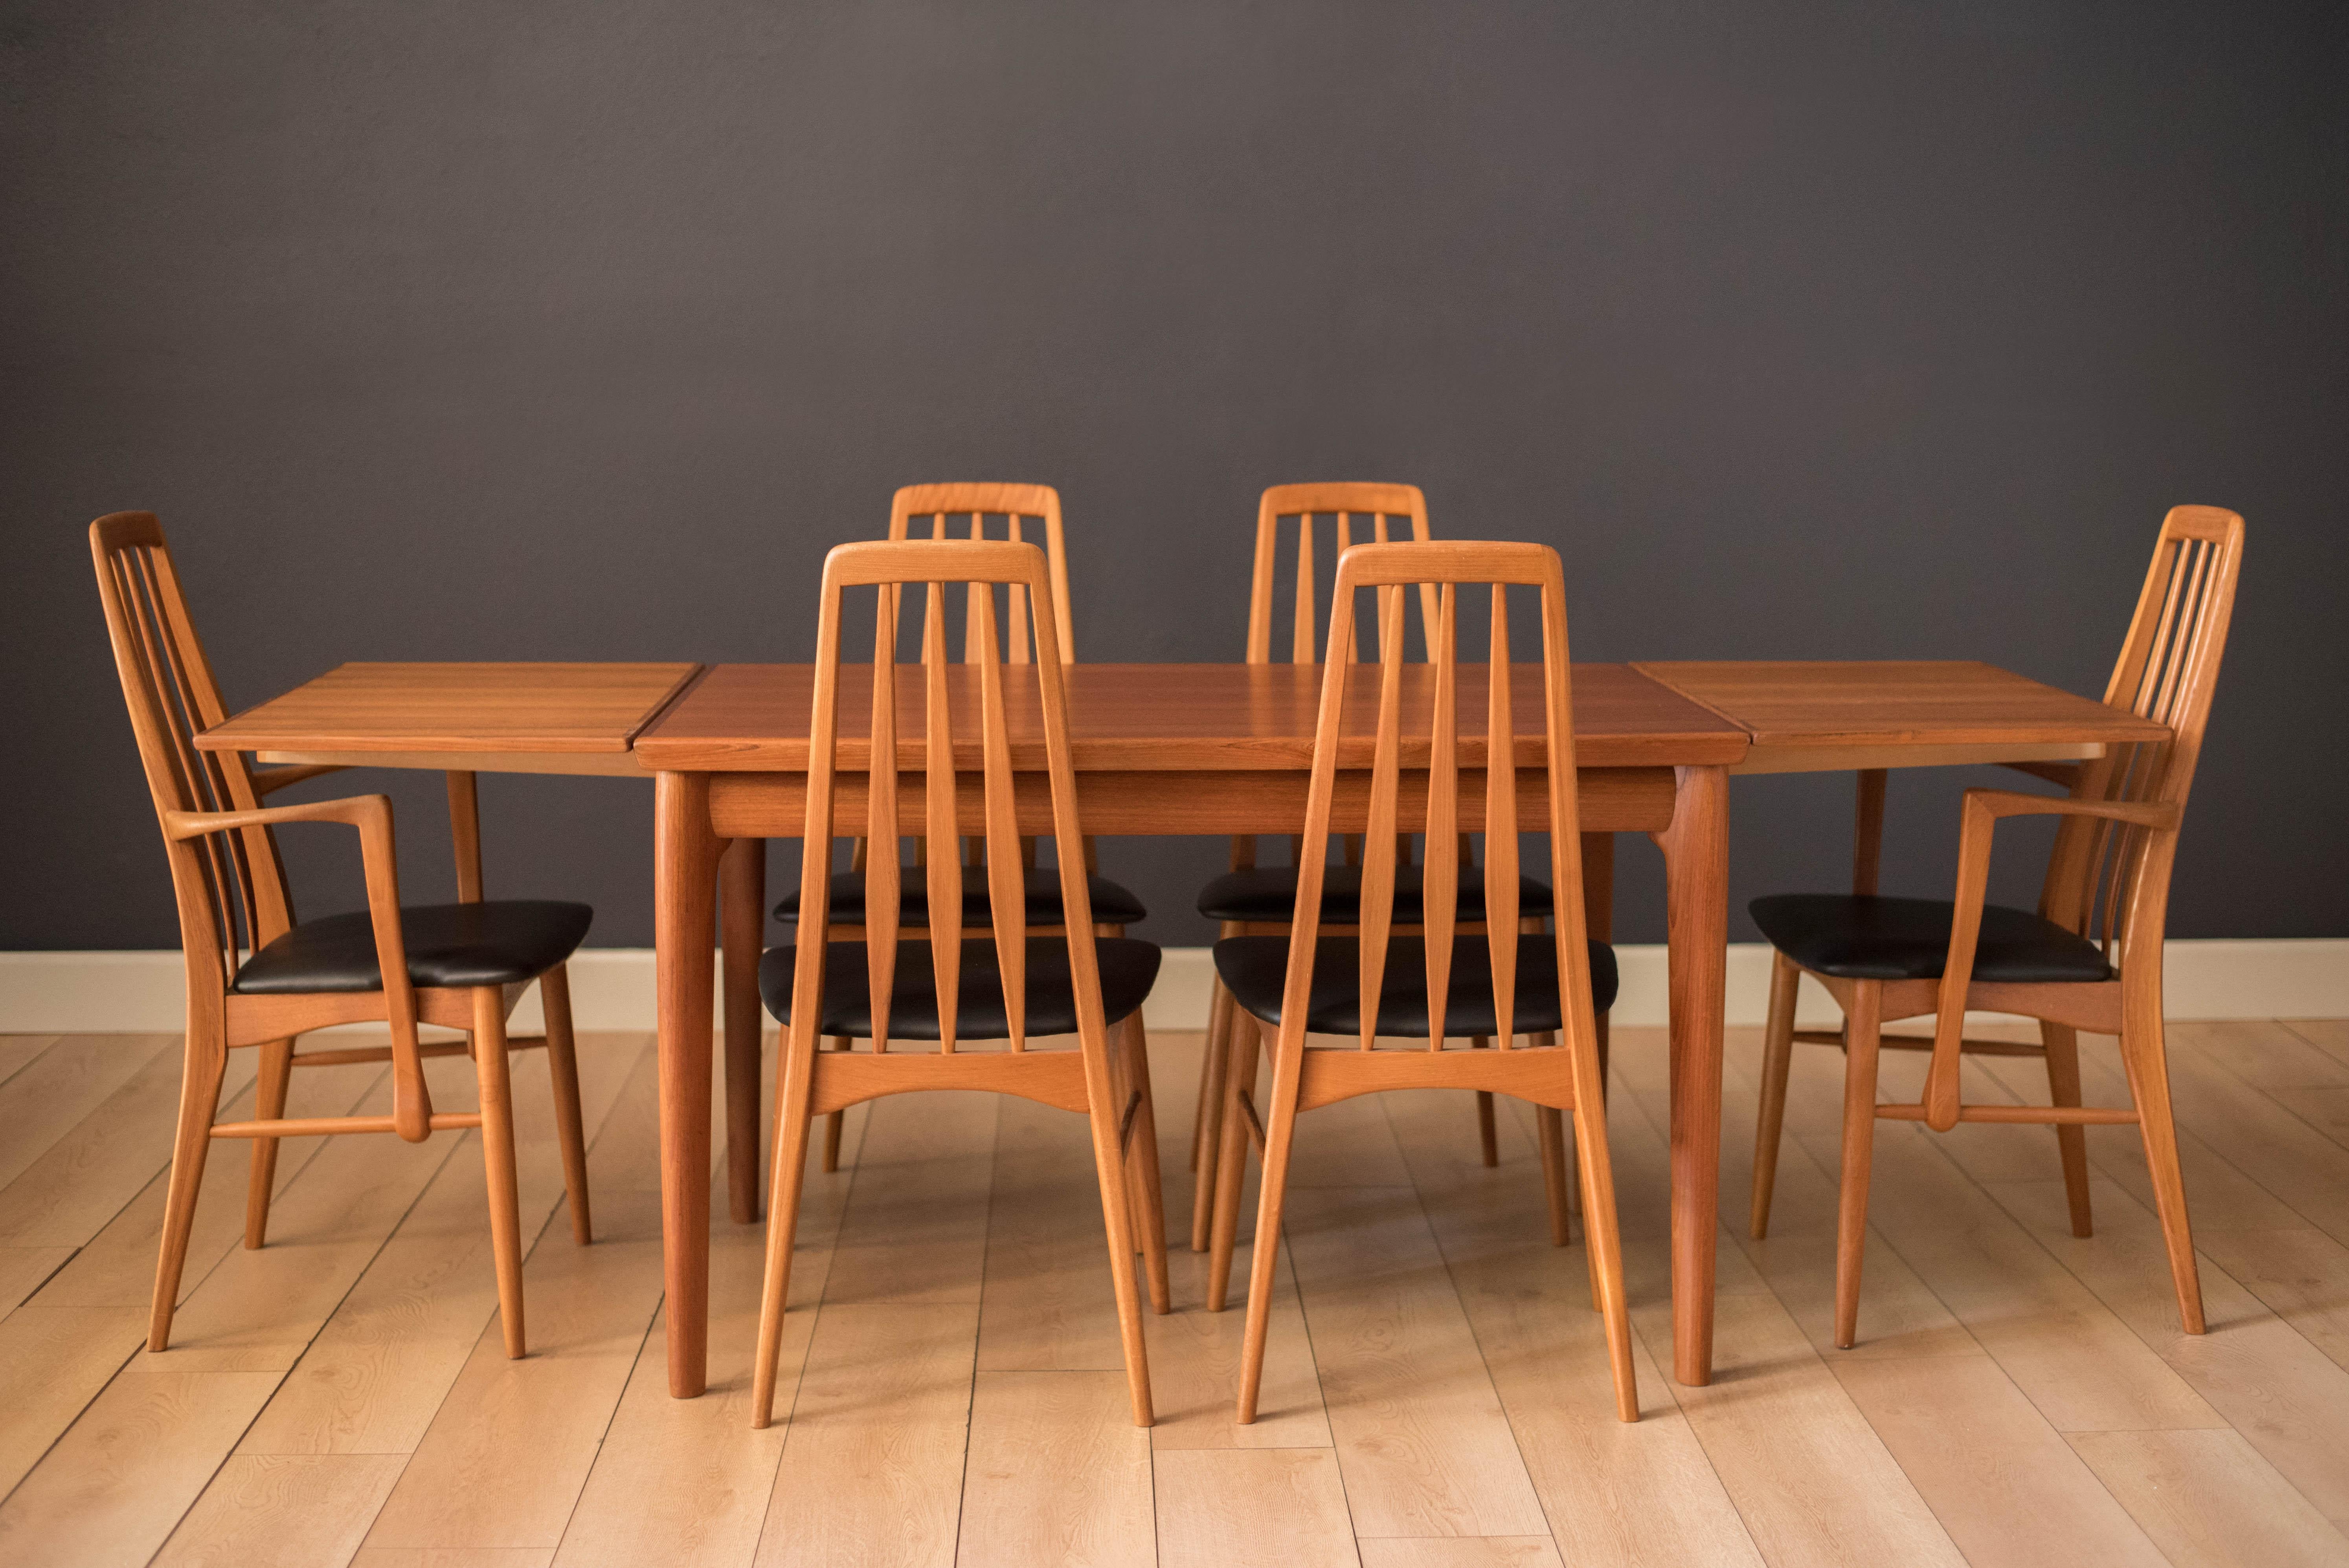 Mid-Century Modern 'Eva' dining chairs by Niels Koefoed for Hornslet Møbelfabrik. Features a sculptural teak frame designed with a tall backrest support. This set includes four side chairs and two captain armchairs. The seats have been newly